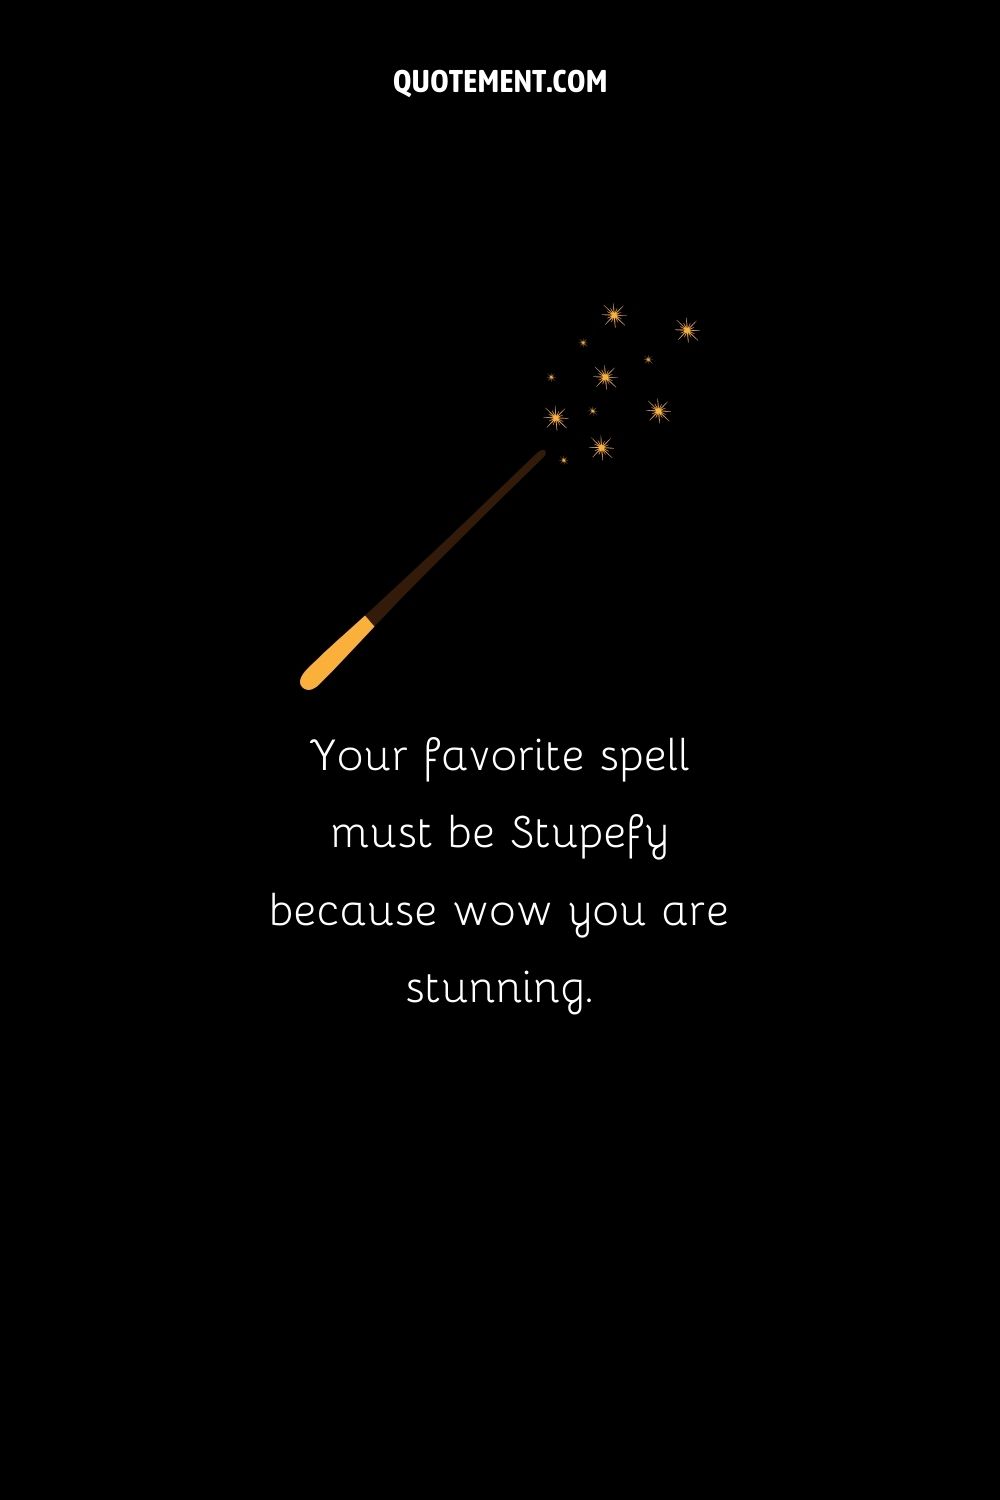 illustration of a magic wand representing spell pick up line
